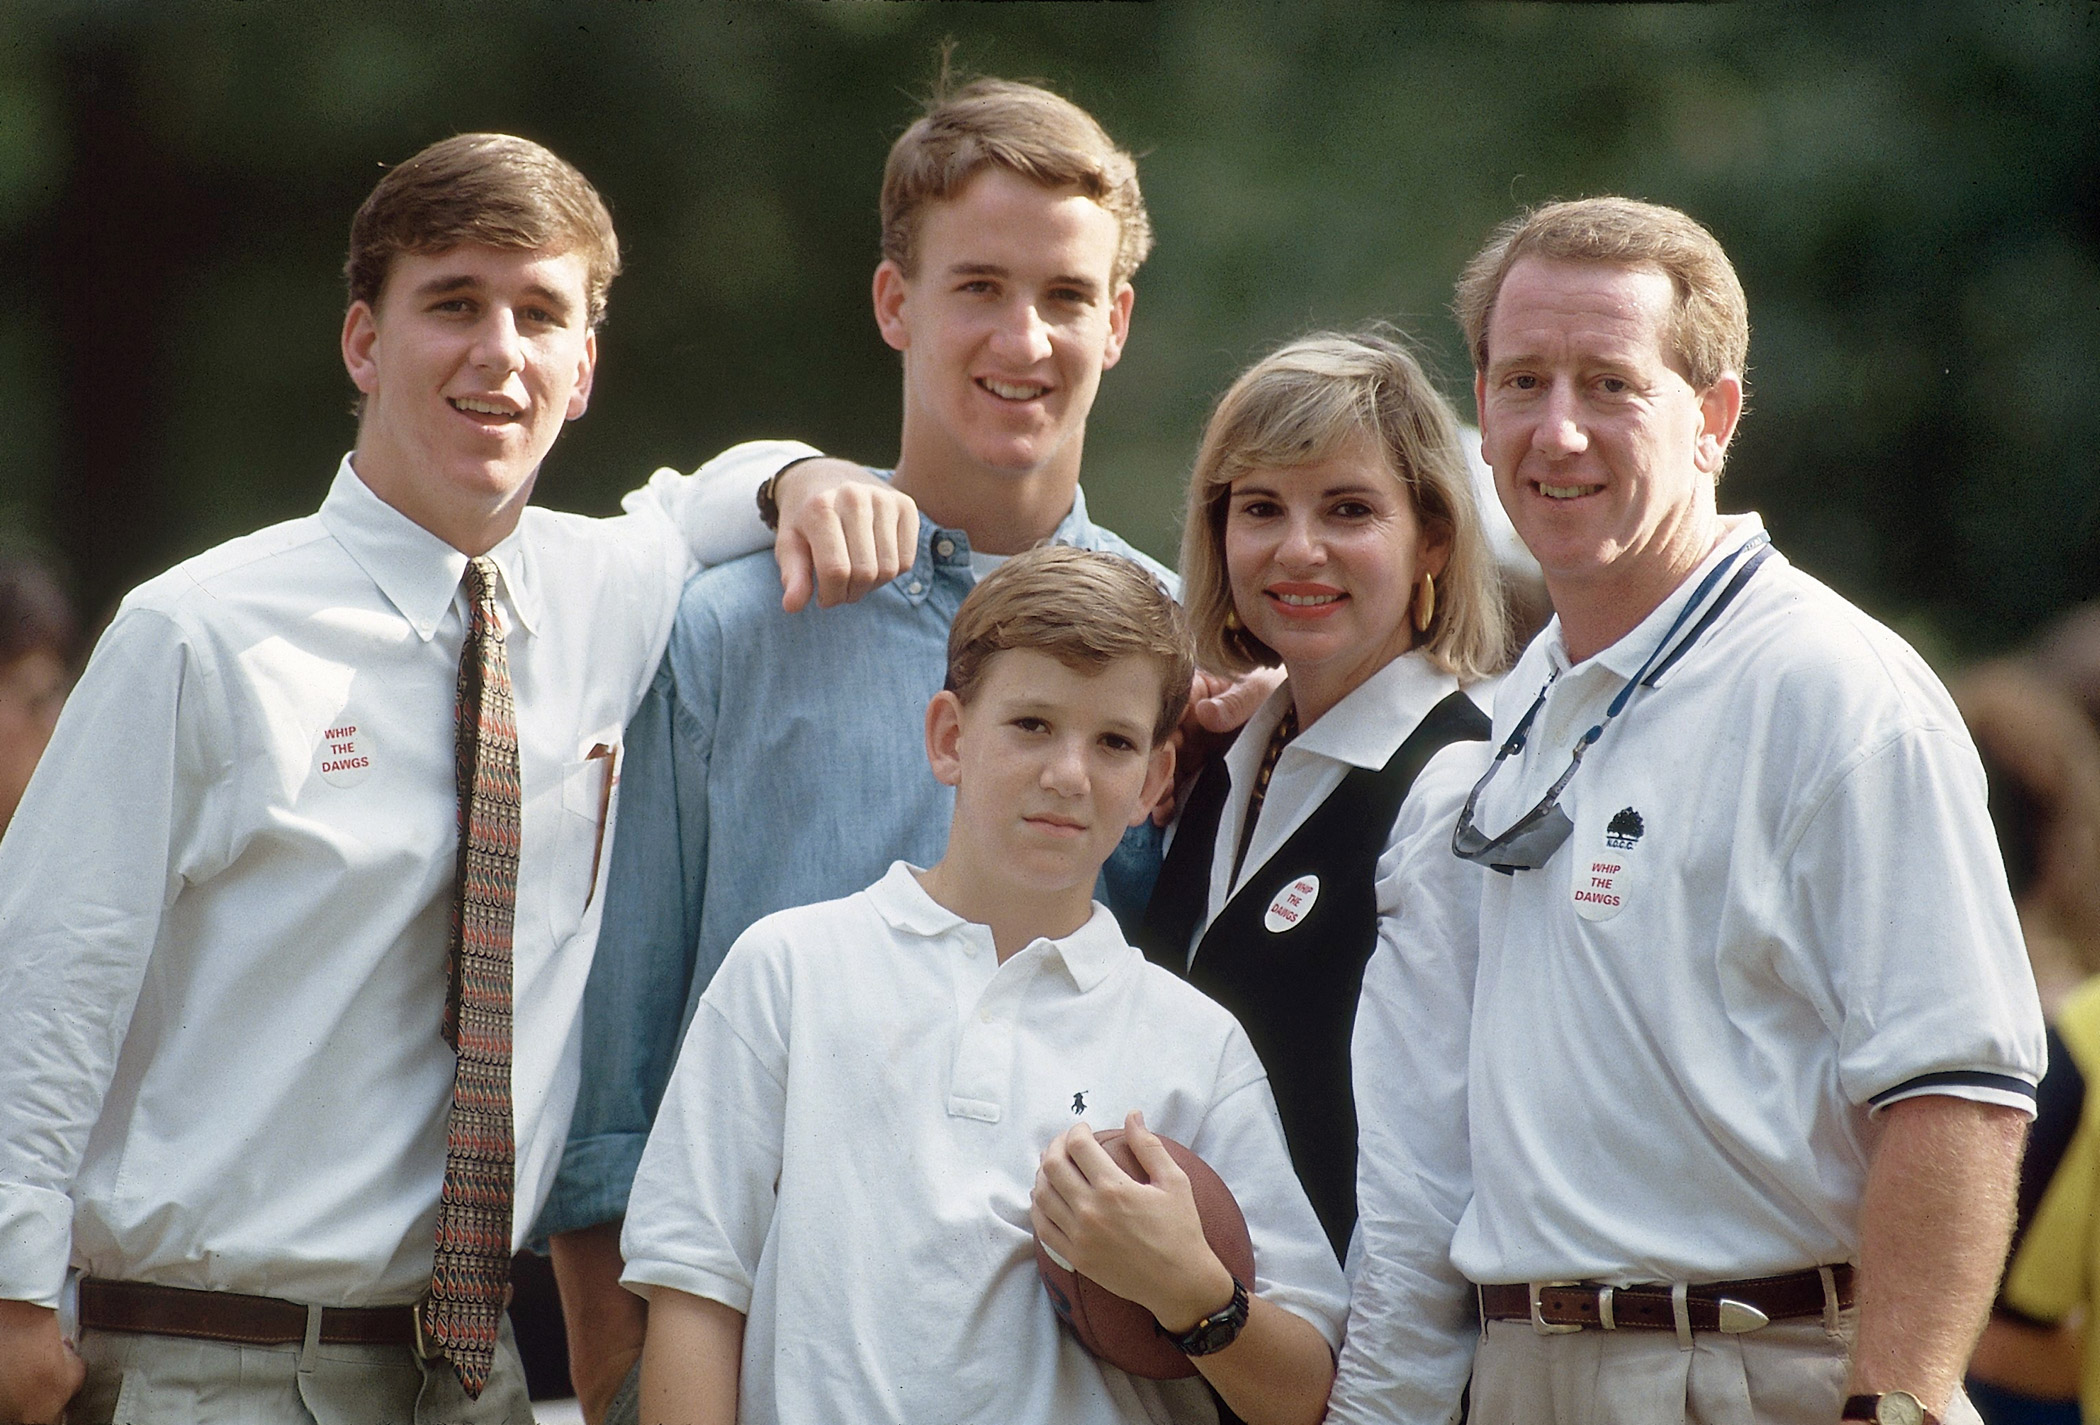 The Manning family poses for a portrait on University of Mississippi campus in 1993. From left,   Cooper Manning, Peyton Manning, Eli Manning, Olivia Manning and Archie Manning.